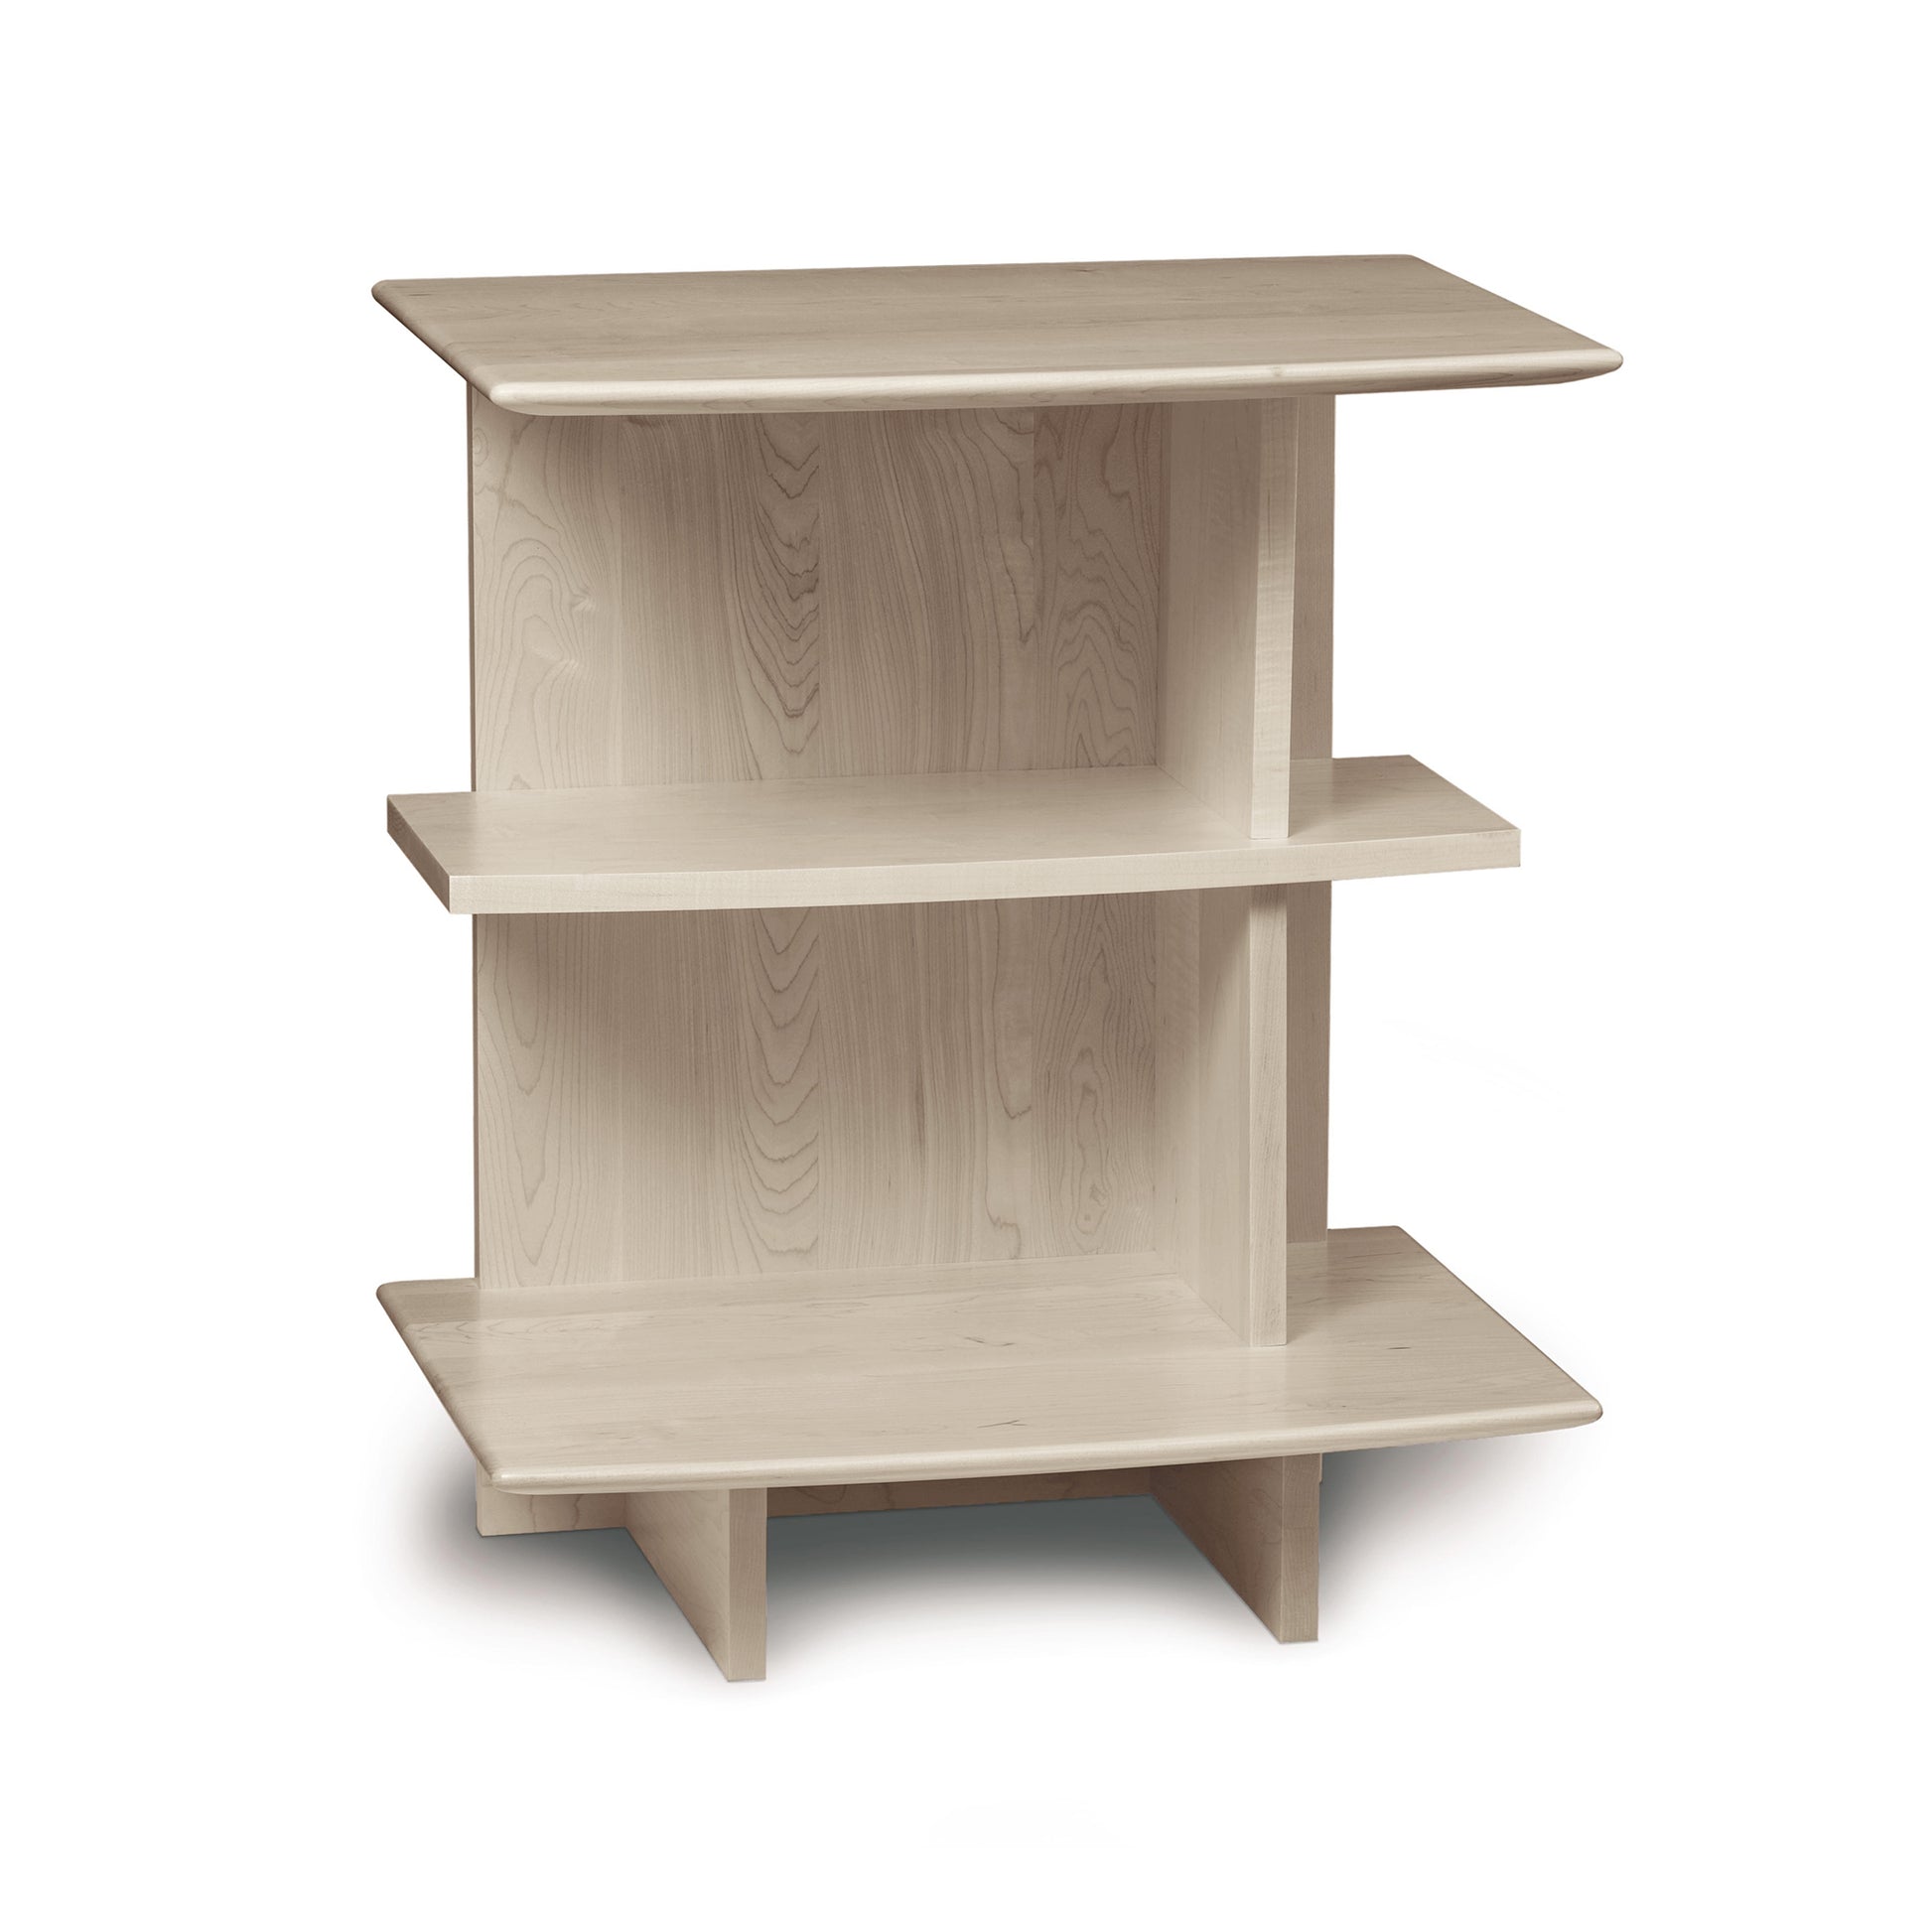 A three-tiered Copeland Furniture Sarah Open Shelf Nightstand on a white background.